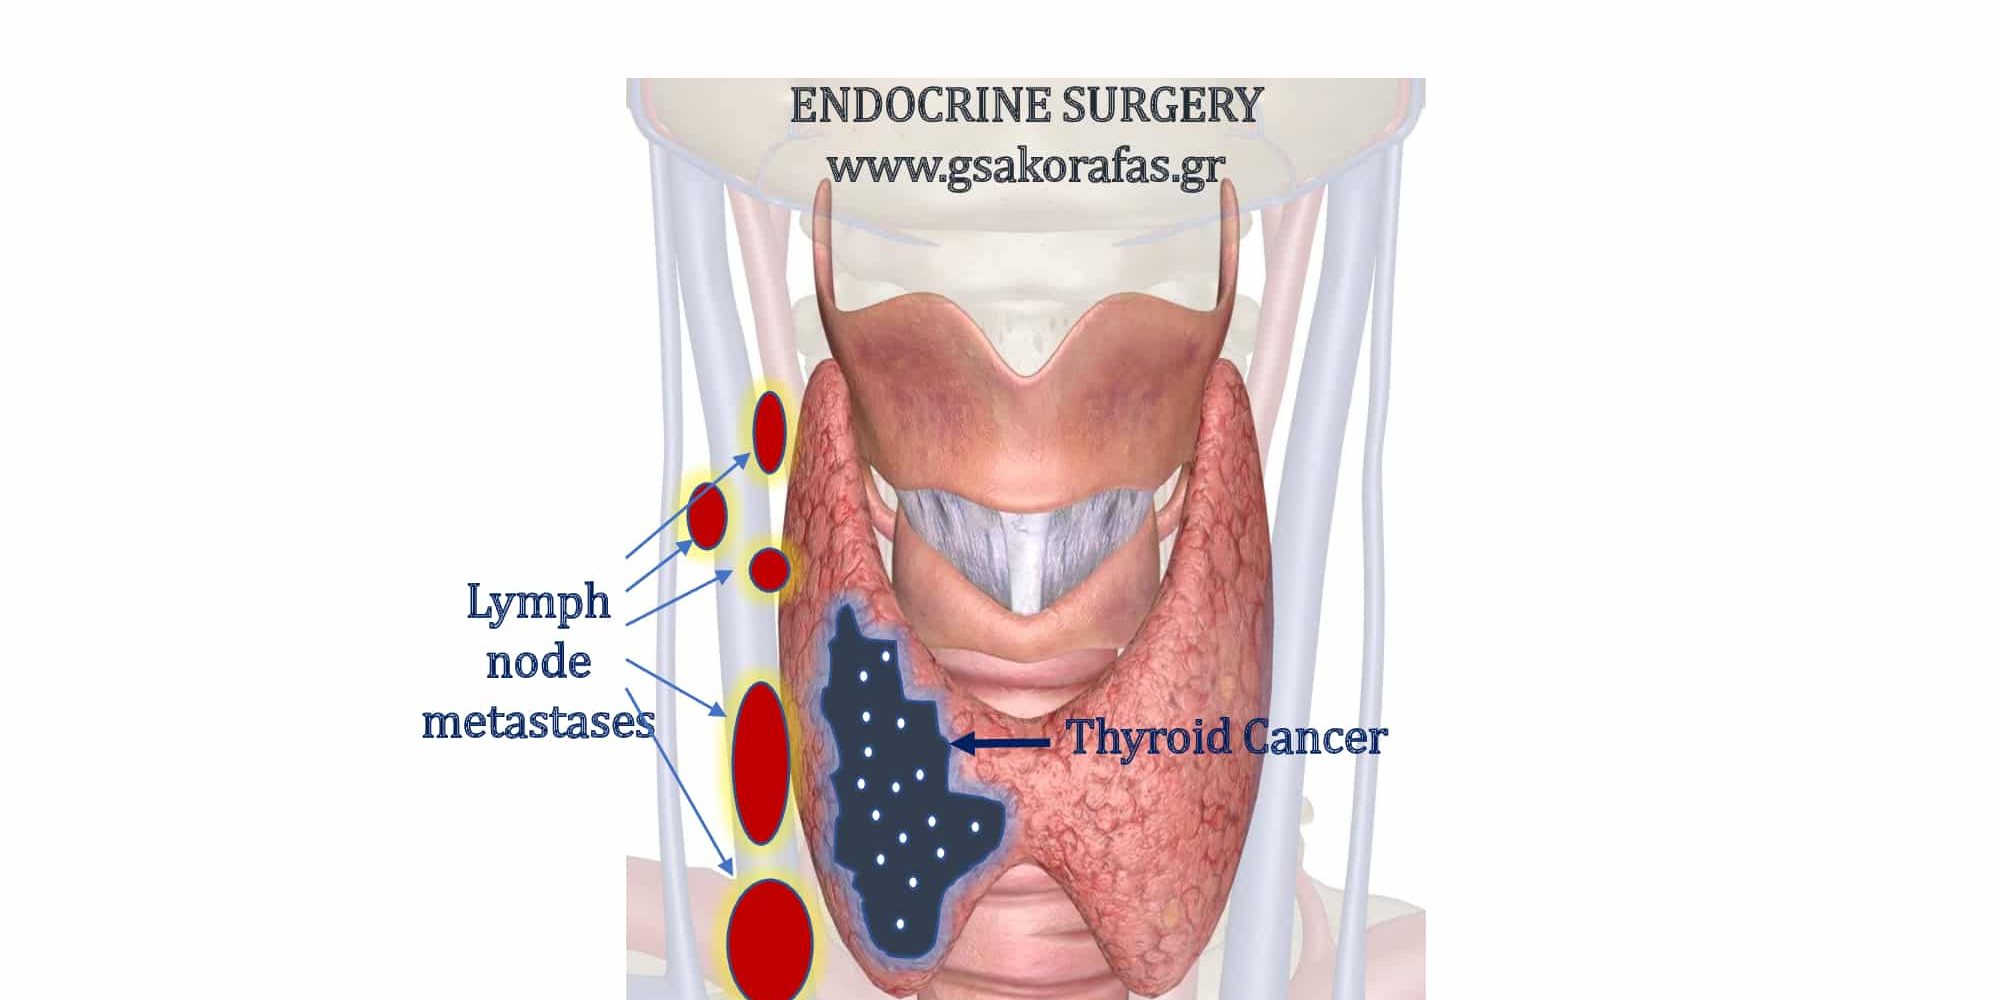 Lymph node metastases in papillary thyroid cancer - prognostic significance